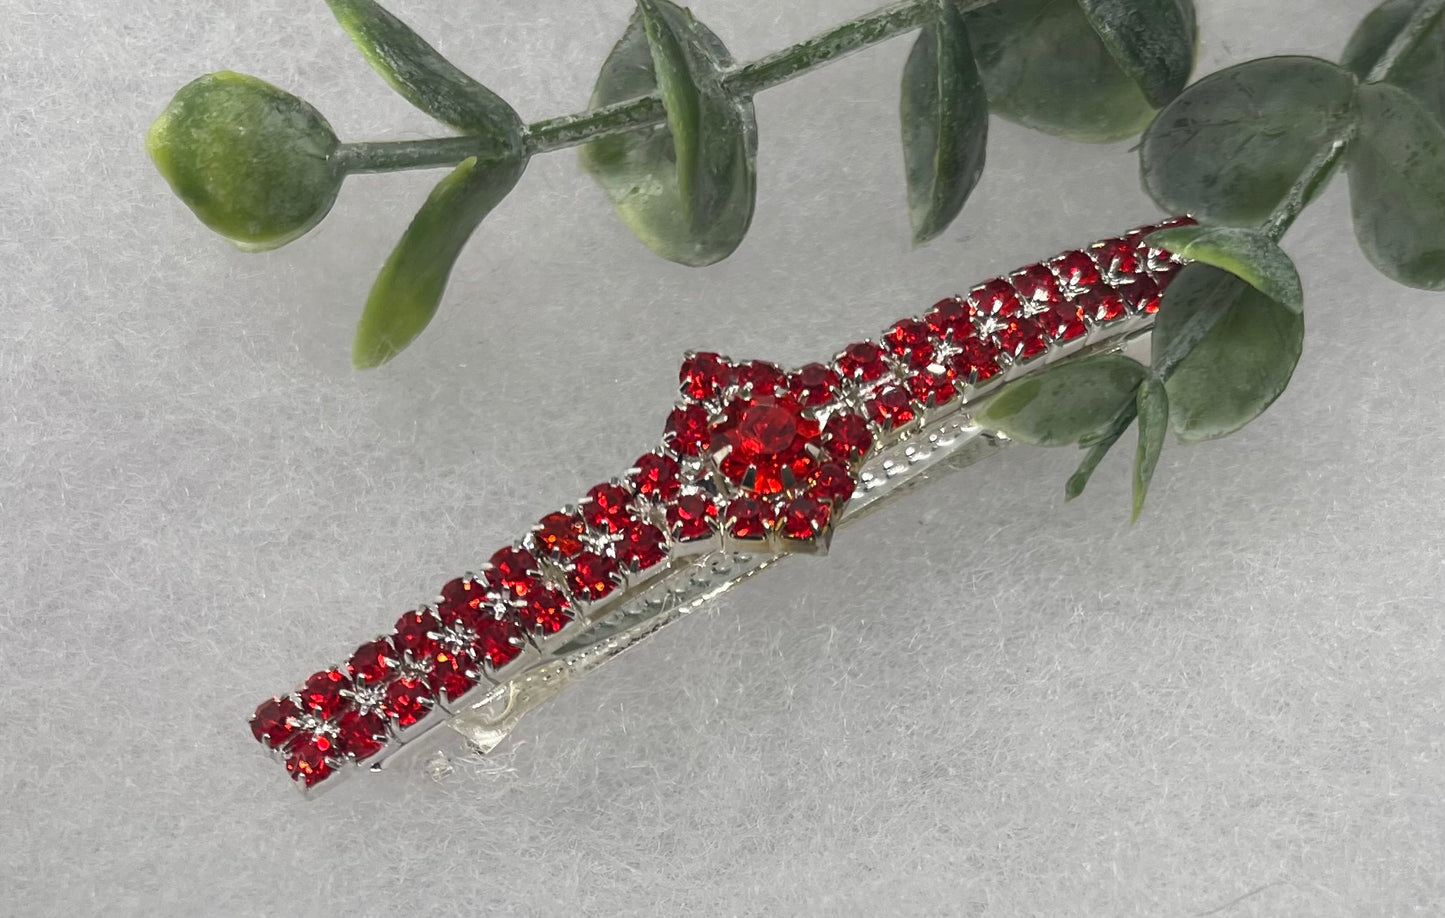 Red Crystal Rhinestone Barrette approximately 3.0”Metal silver tone formal hair accessory gift wedding bridal shower accessories